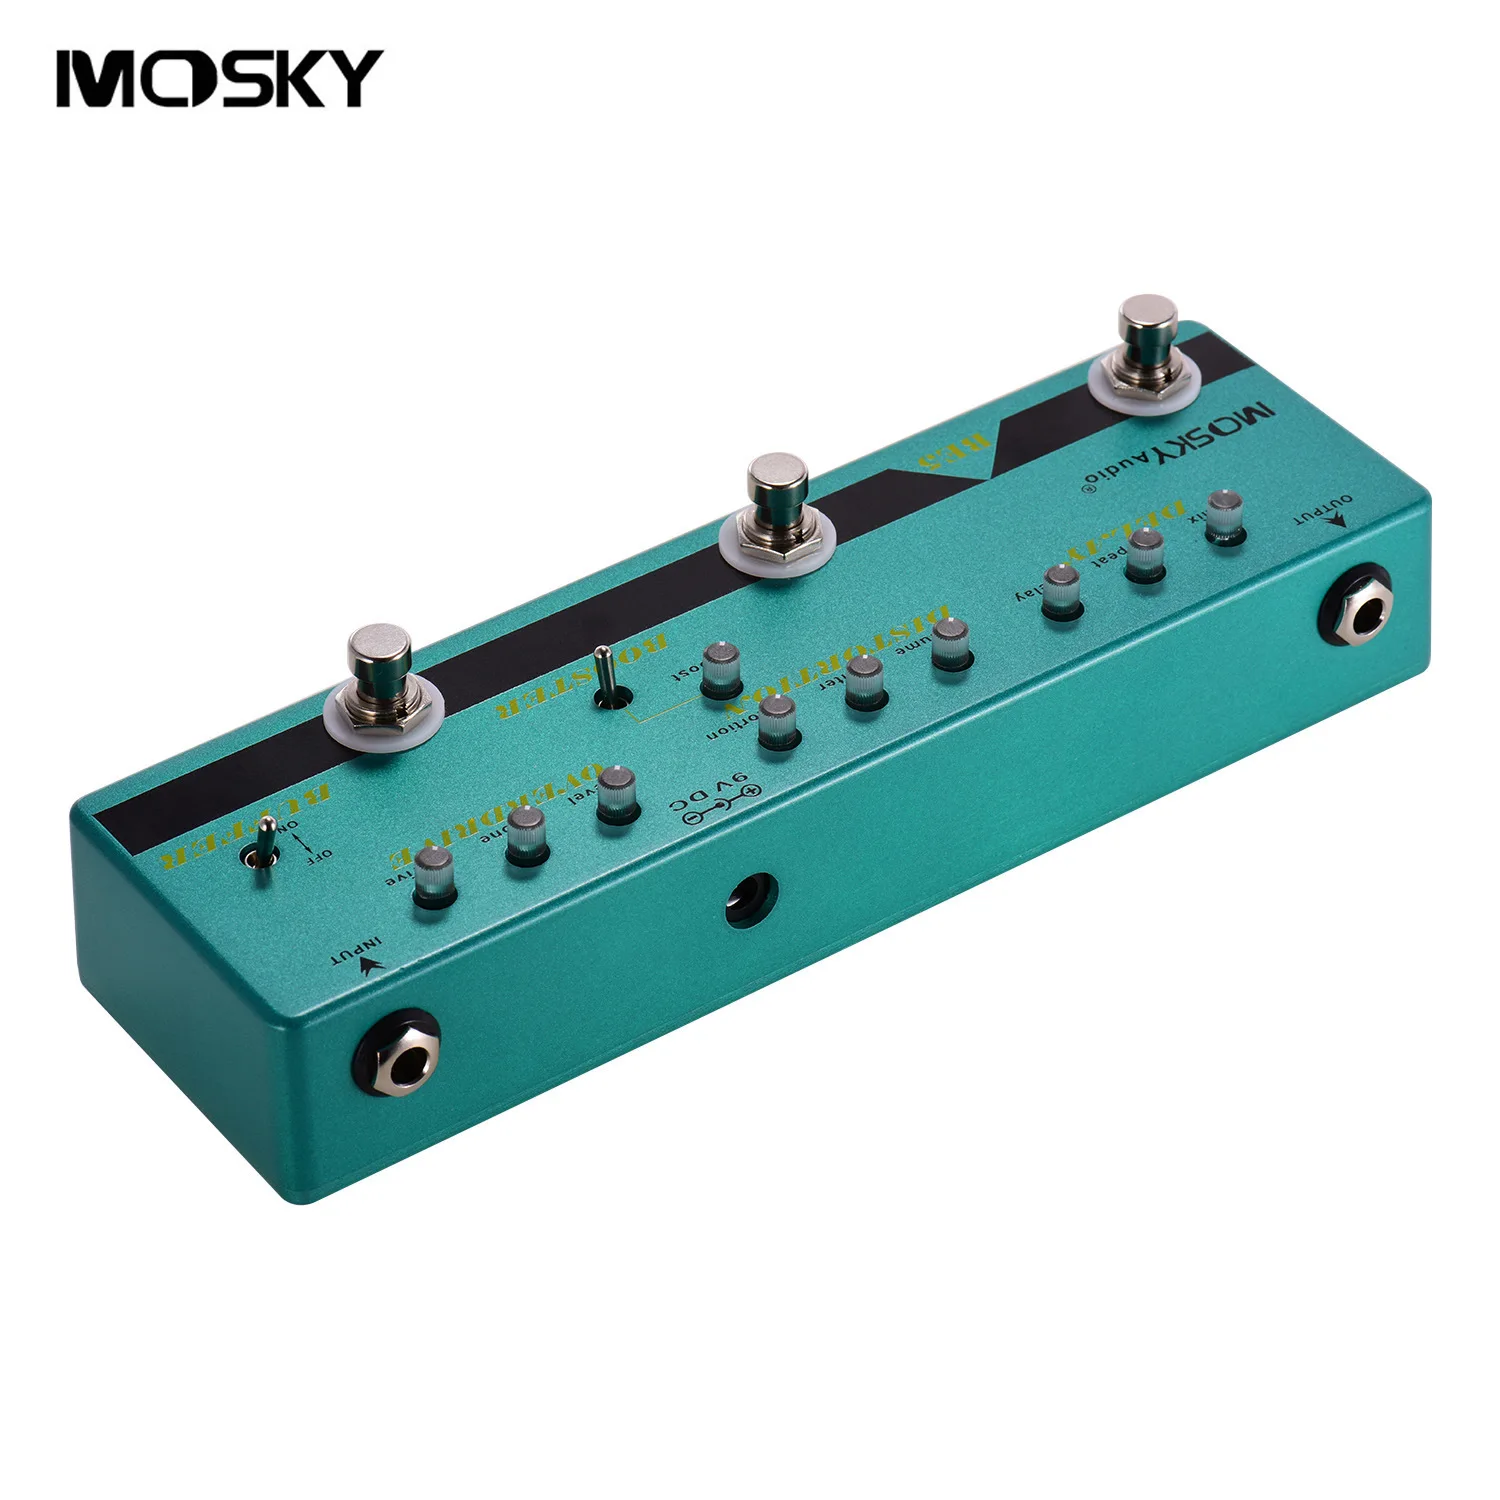 5-in-1 Guitar Multi-Effects Pedal Buffer+Overdrive + Booster +Distortion +Delay Effects True Bypass Full Metal Shell MOSKY BE-5 enlarge